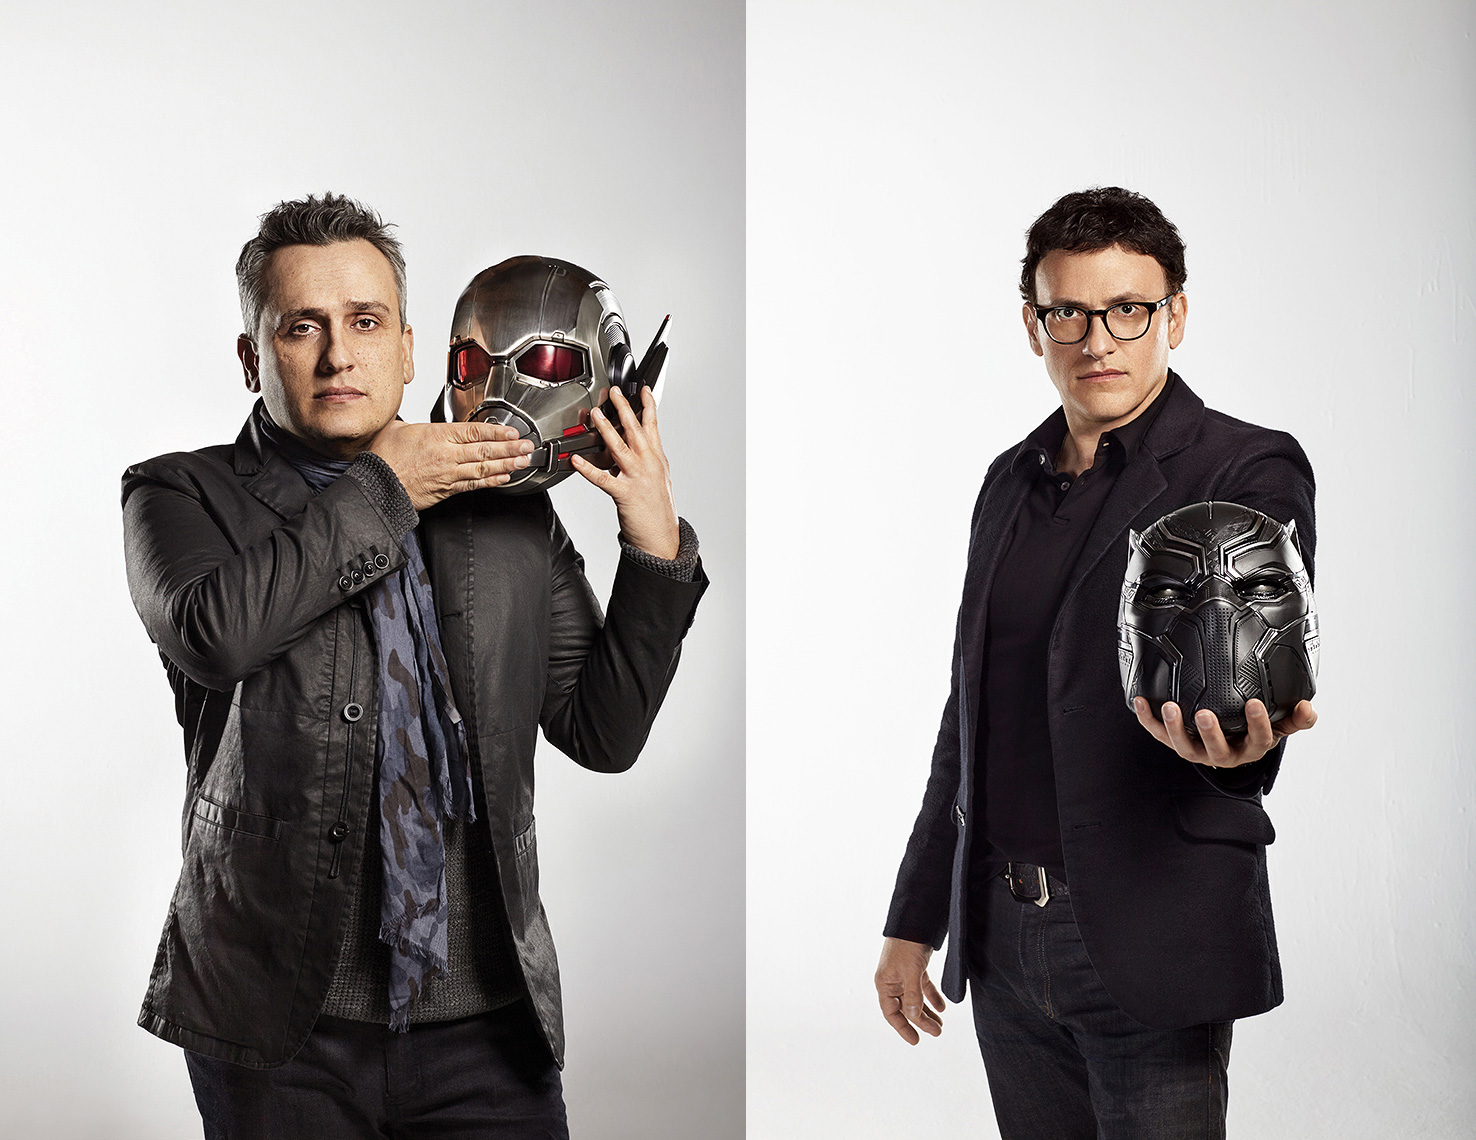 Russo-Brothers  Professional portrait photography by commercial photographer Ylva Erevall